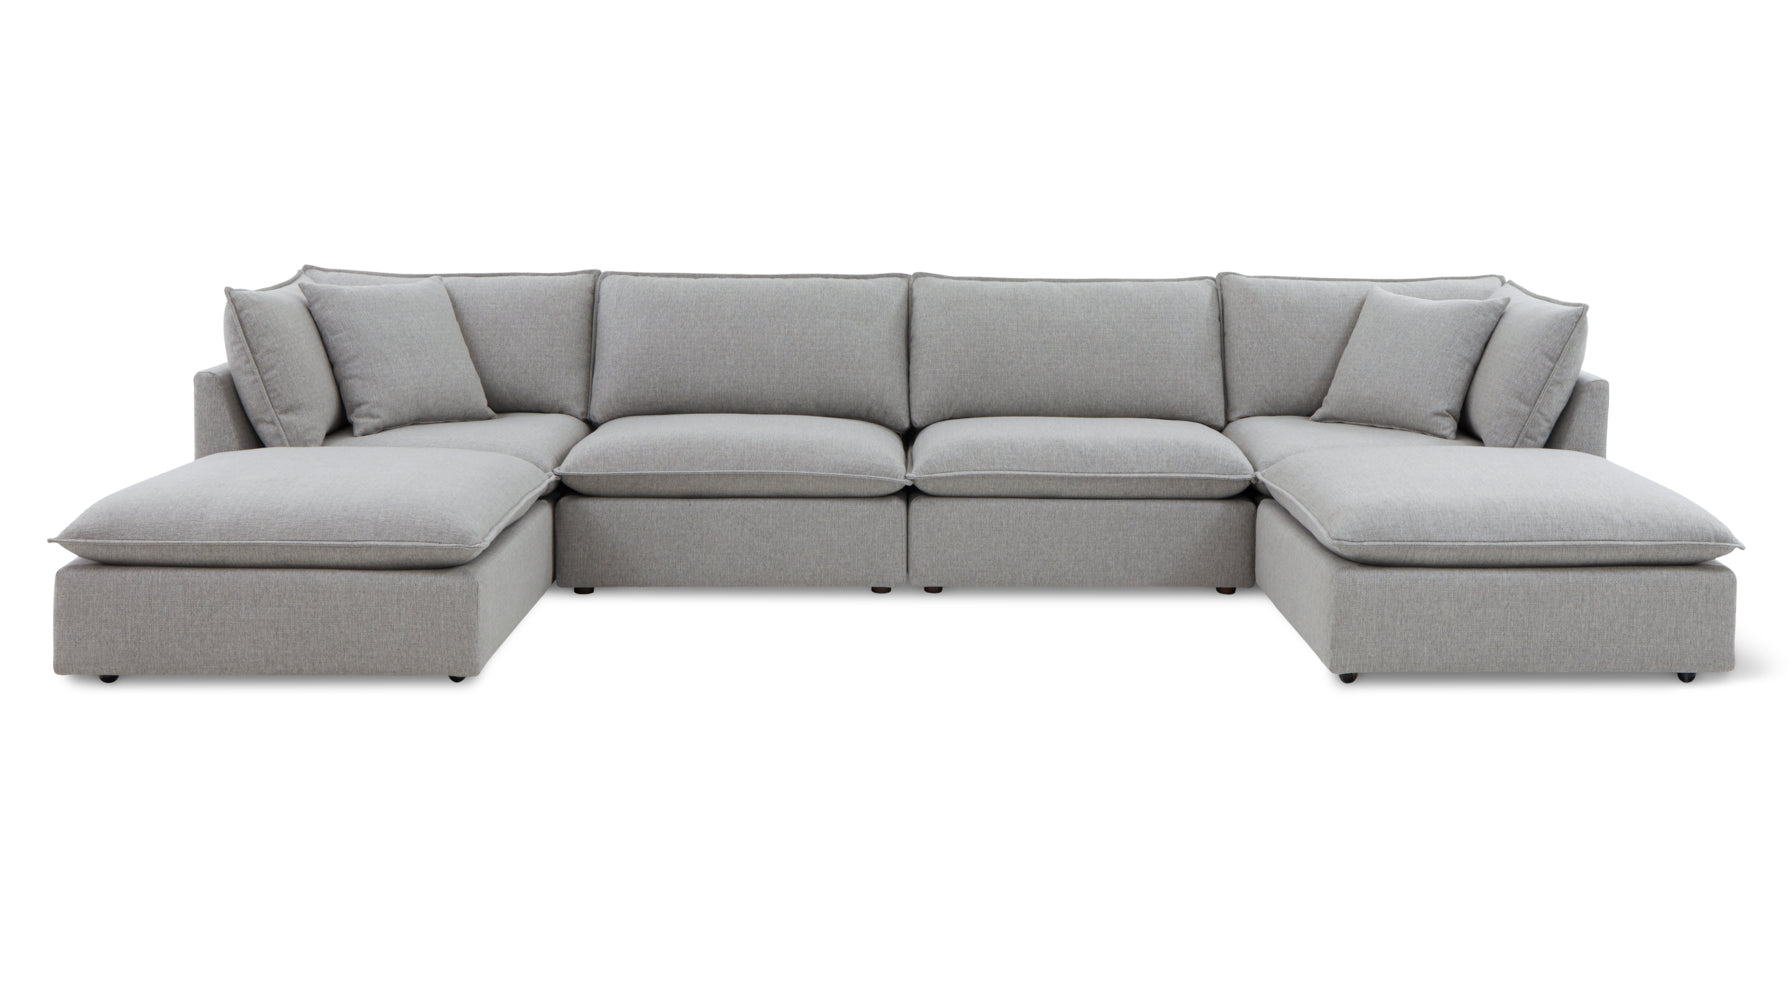 Chill Time 6-Piece Modular U-Shaped Sectional, Heather - Image 1